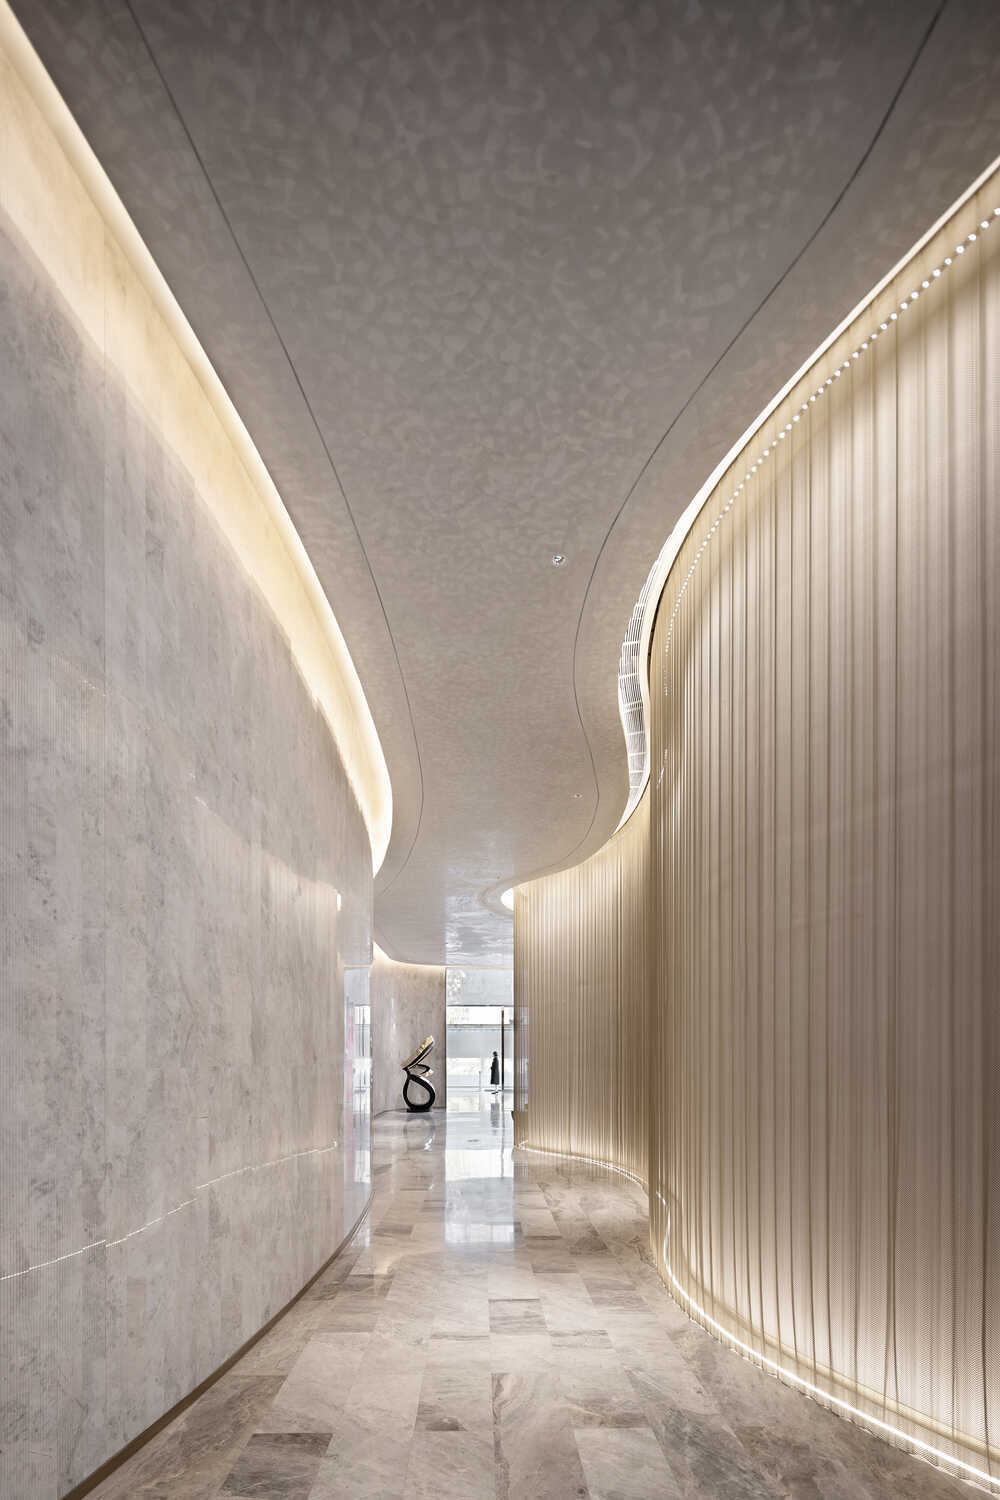 The Osmanthus Grace Experience Center by Qiran Design Group